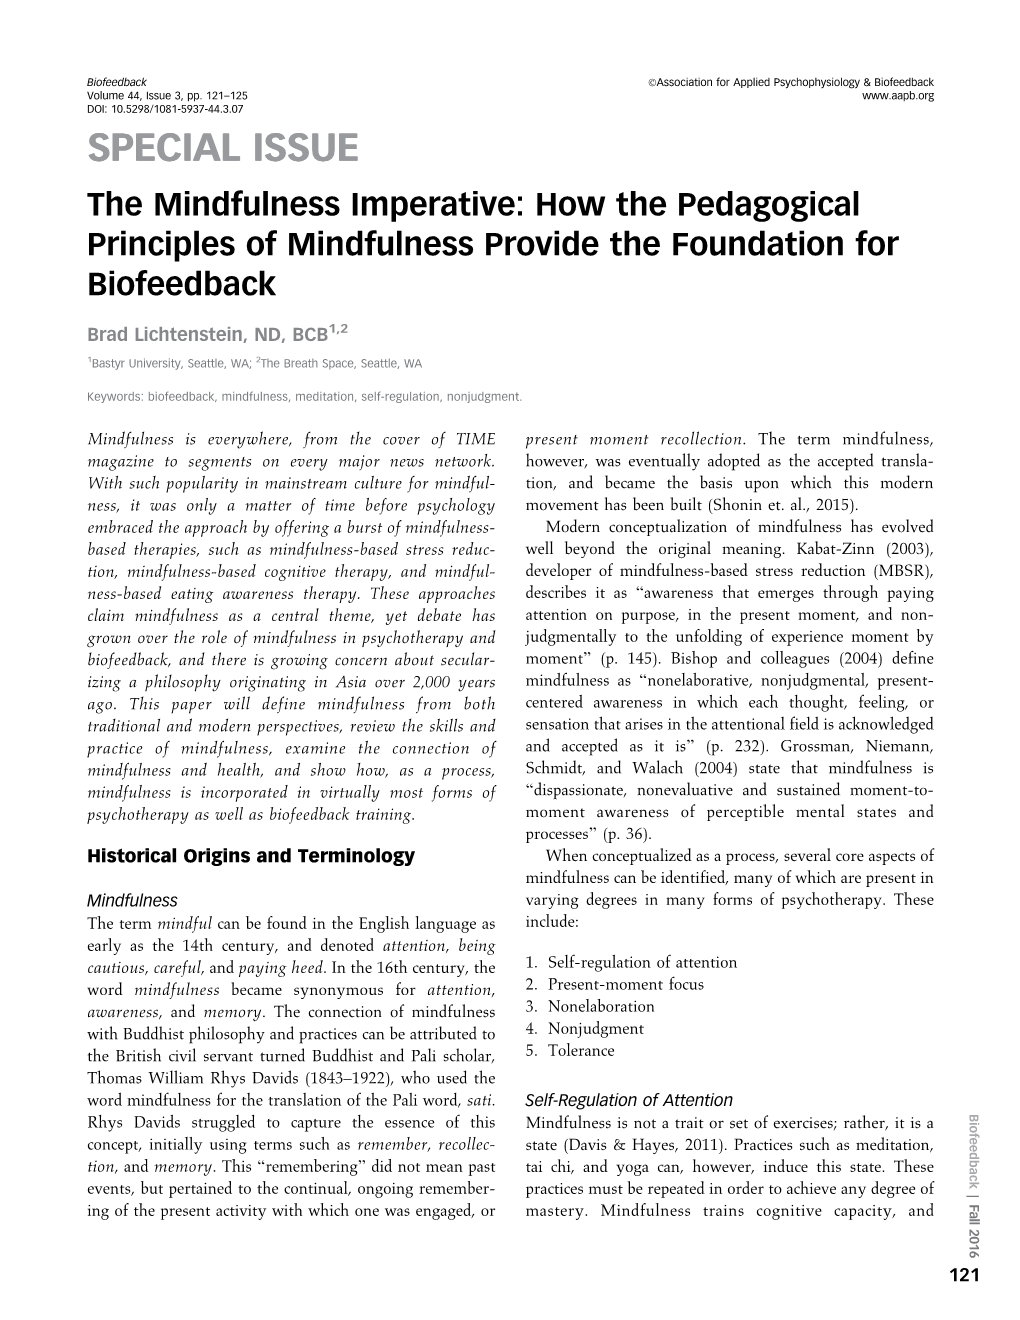 The Mindfulness Imperative: How the Pedagogical Principles of Mindfulness Provide the Foundation for Biofeedback